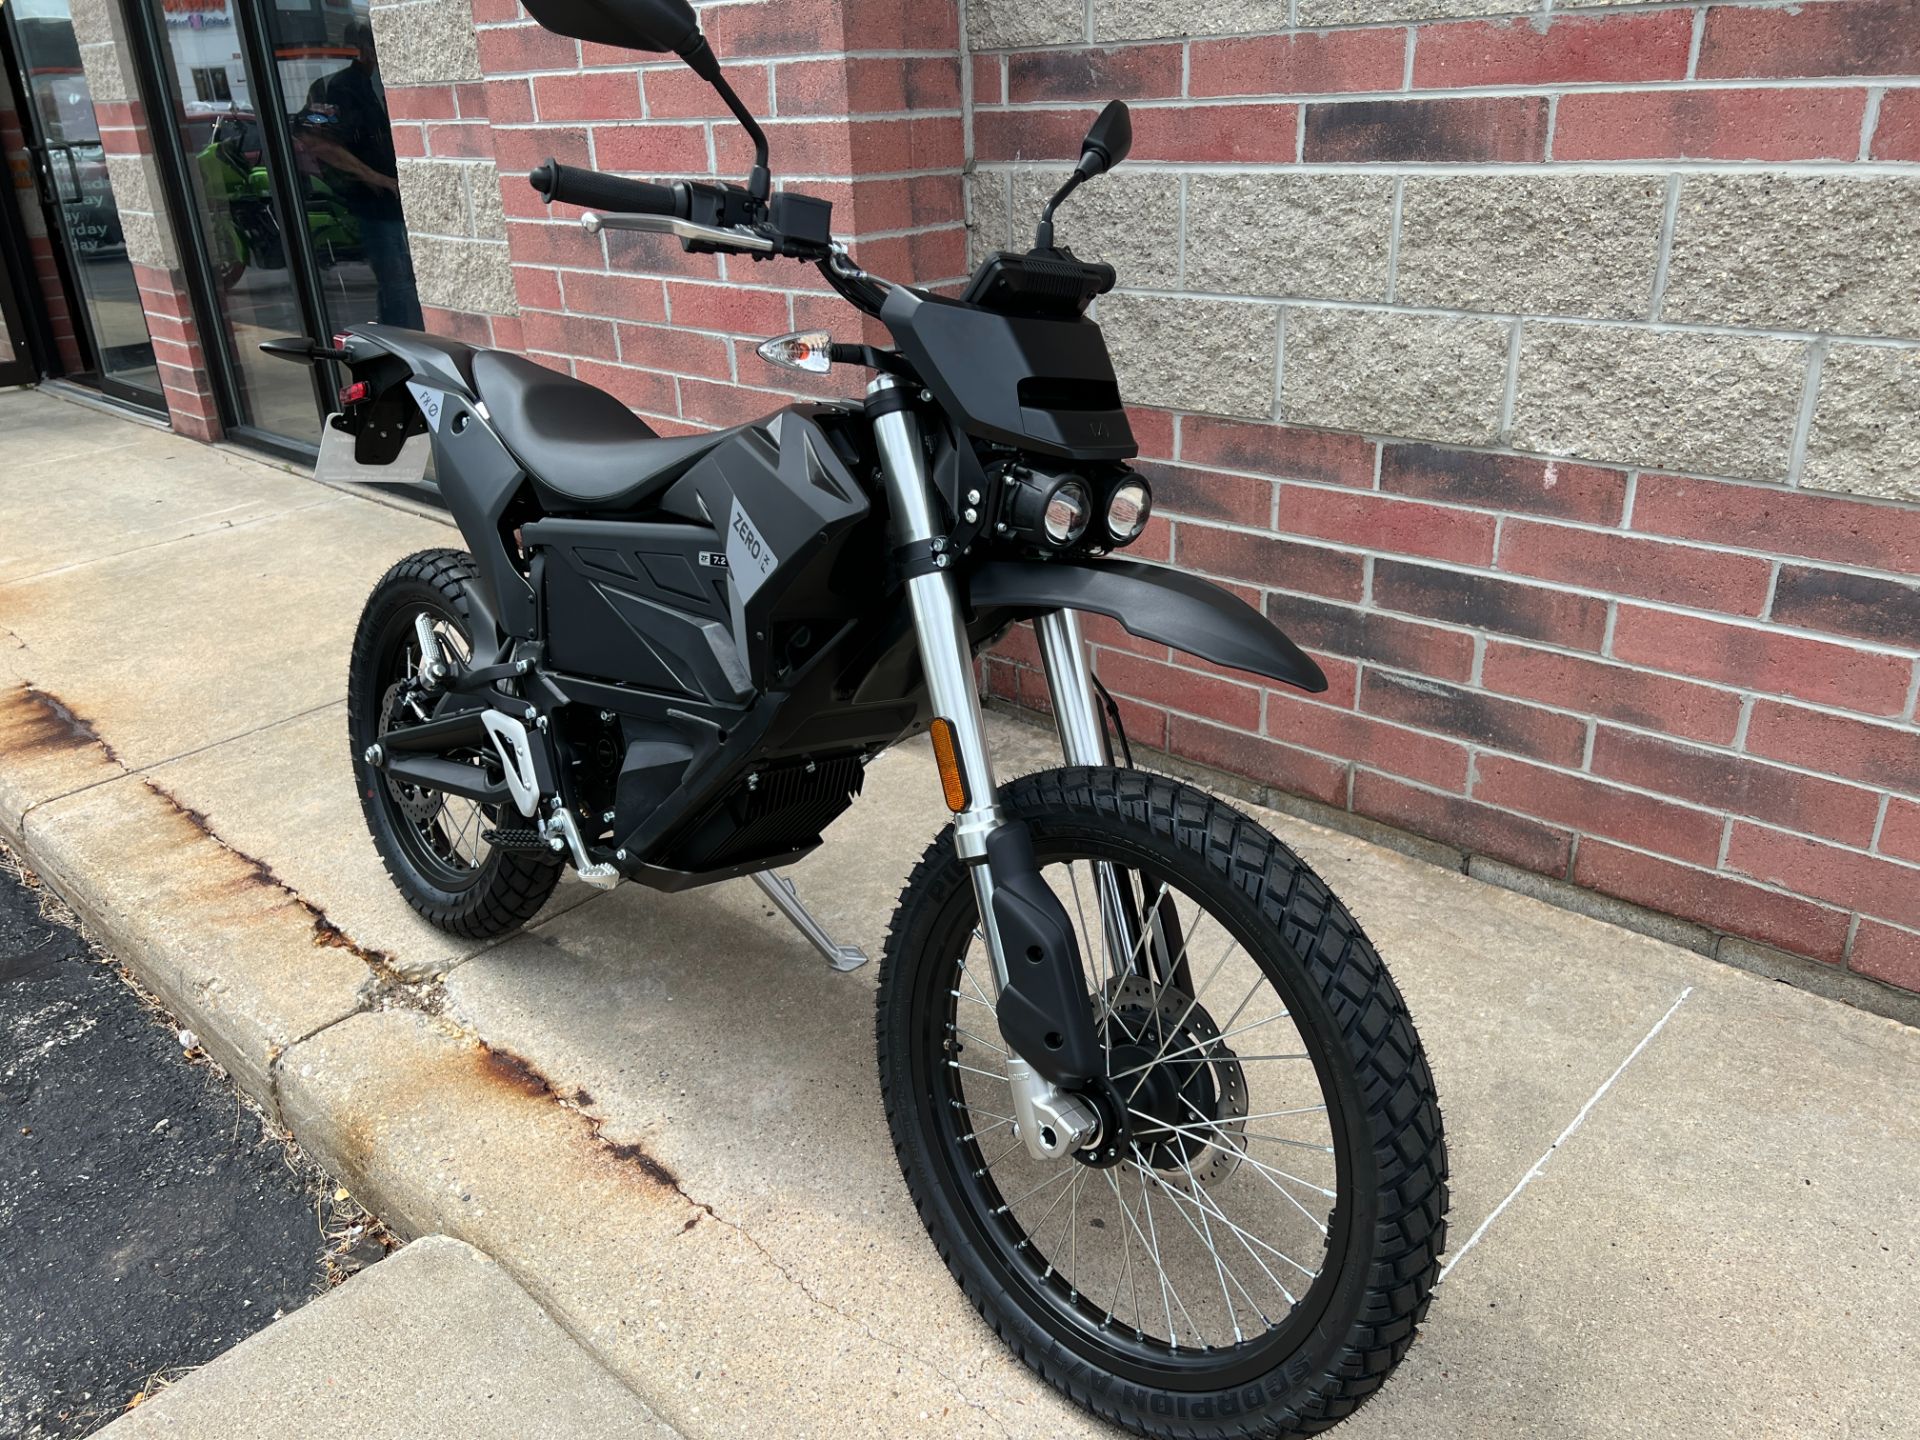 2023 Zero Motorcycles FX ZF7.2 Integrated in Muskego, Wisconsin - Photo 2